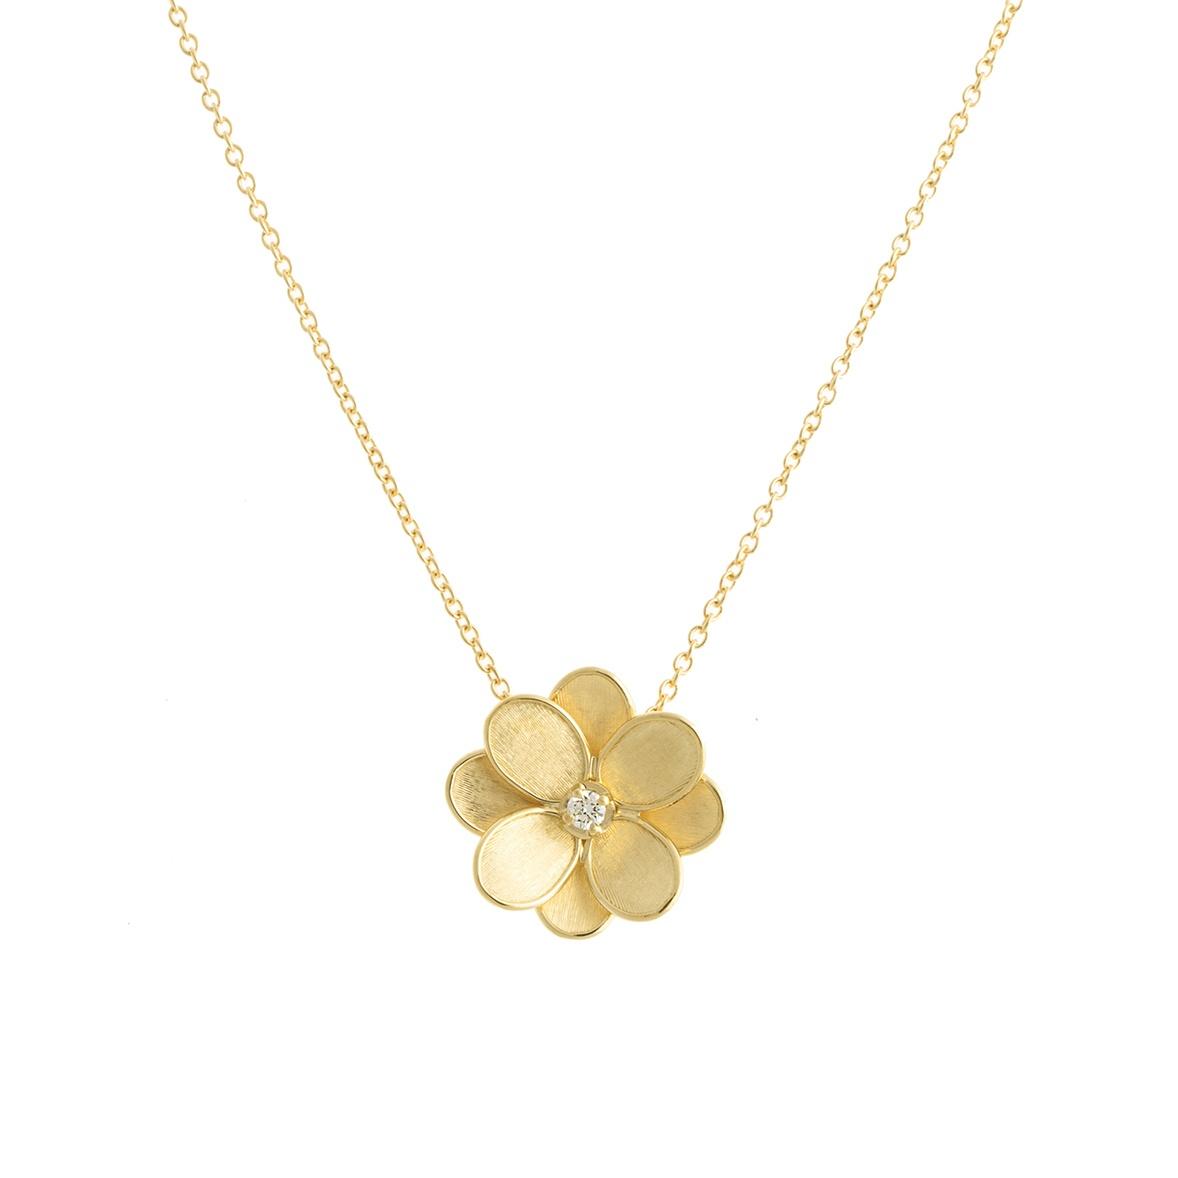 Marco Bicego Petali Small Flower Pendant Necklace